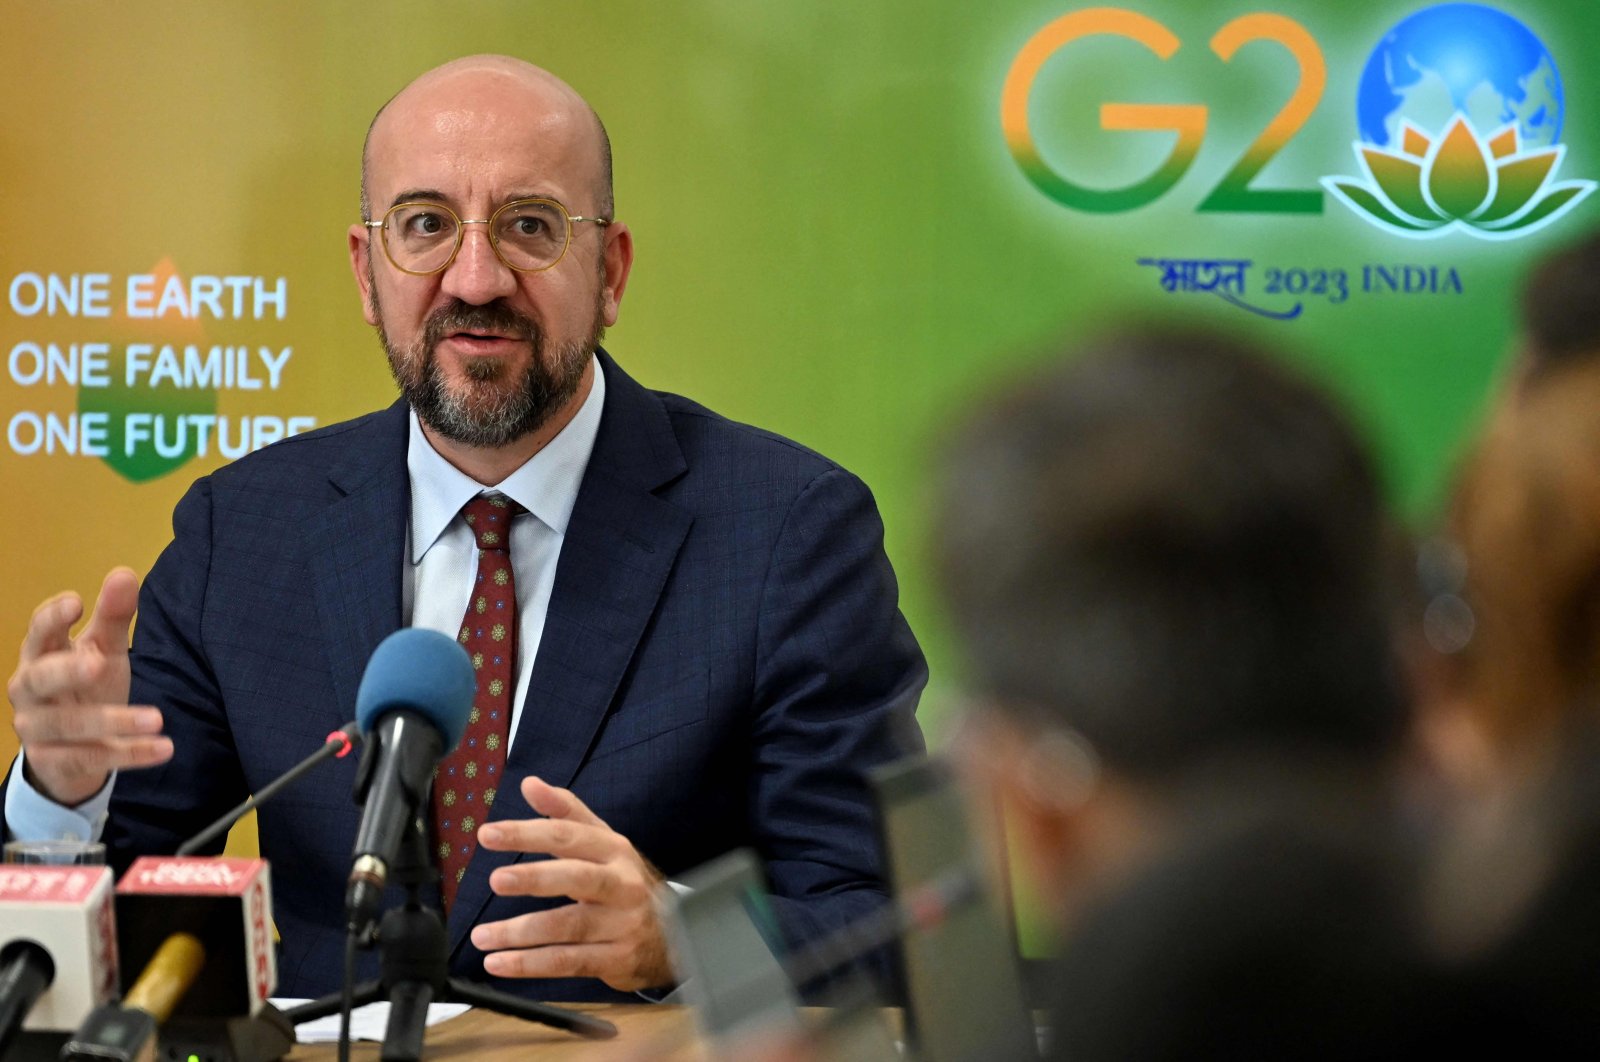 European Council President Charles Michel speaks during a press conference on the eve of G-20 summit in New Delhi, India, Sept. 8, 2023. (AFP Photo)